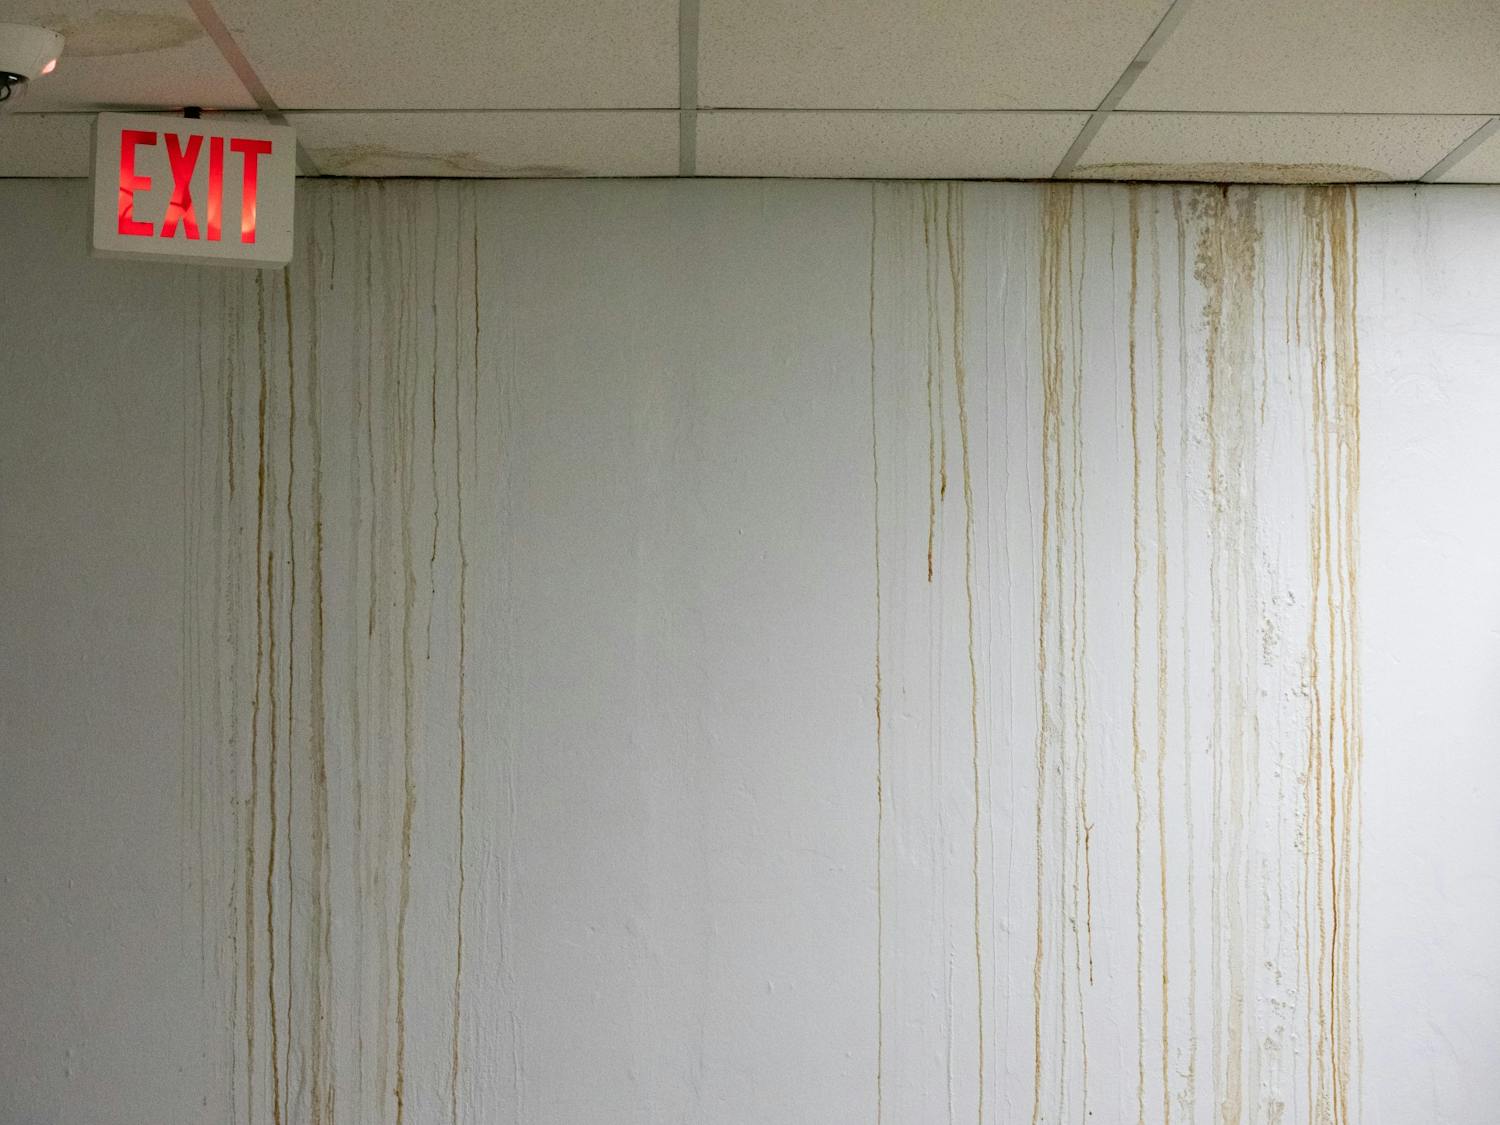 Leaks in the tunnel/hallway between Knox Hall and Student Union have caught the eye of some UB students.
